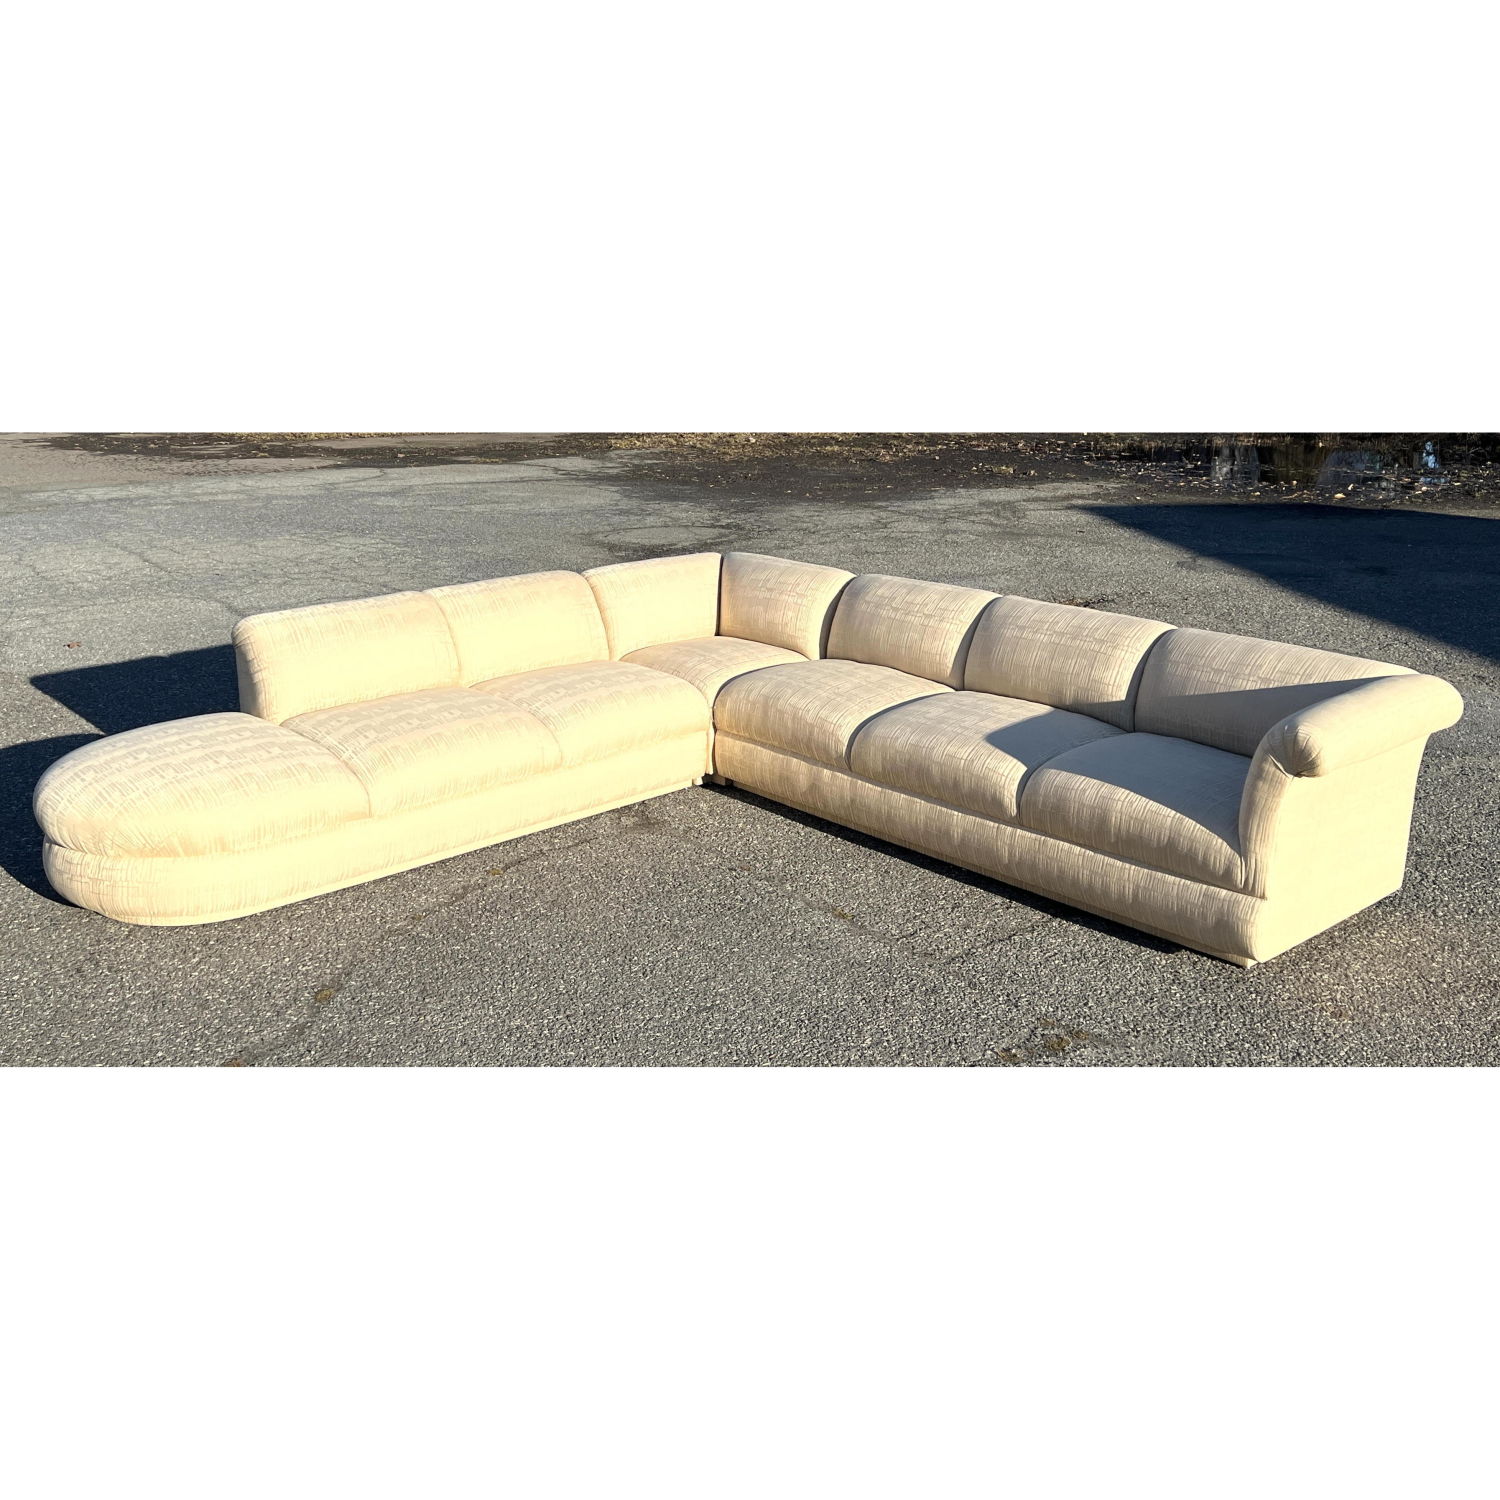 3pc Modernist Sectional Sofa Pit